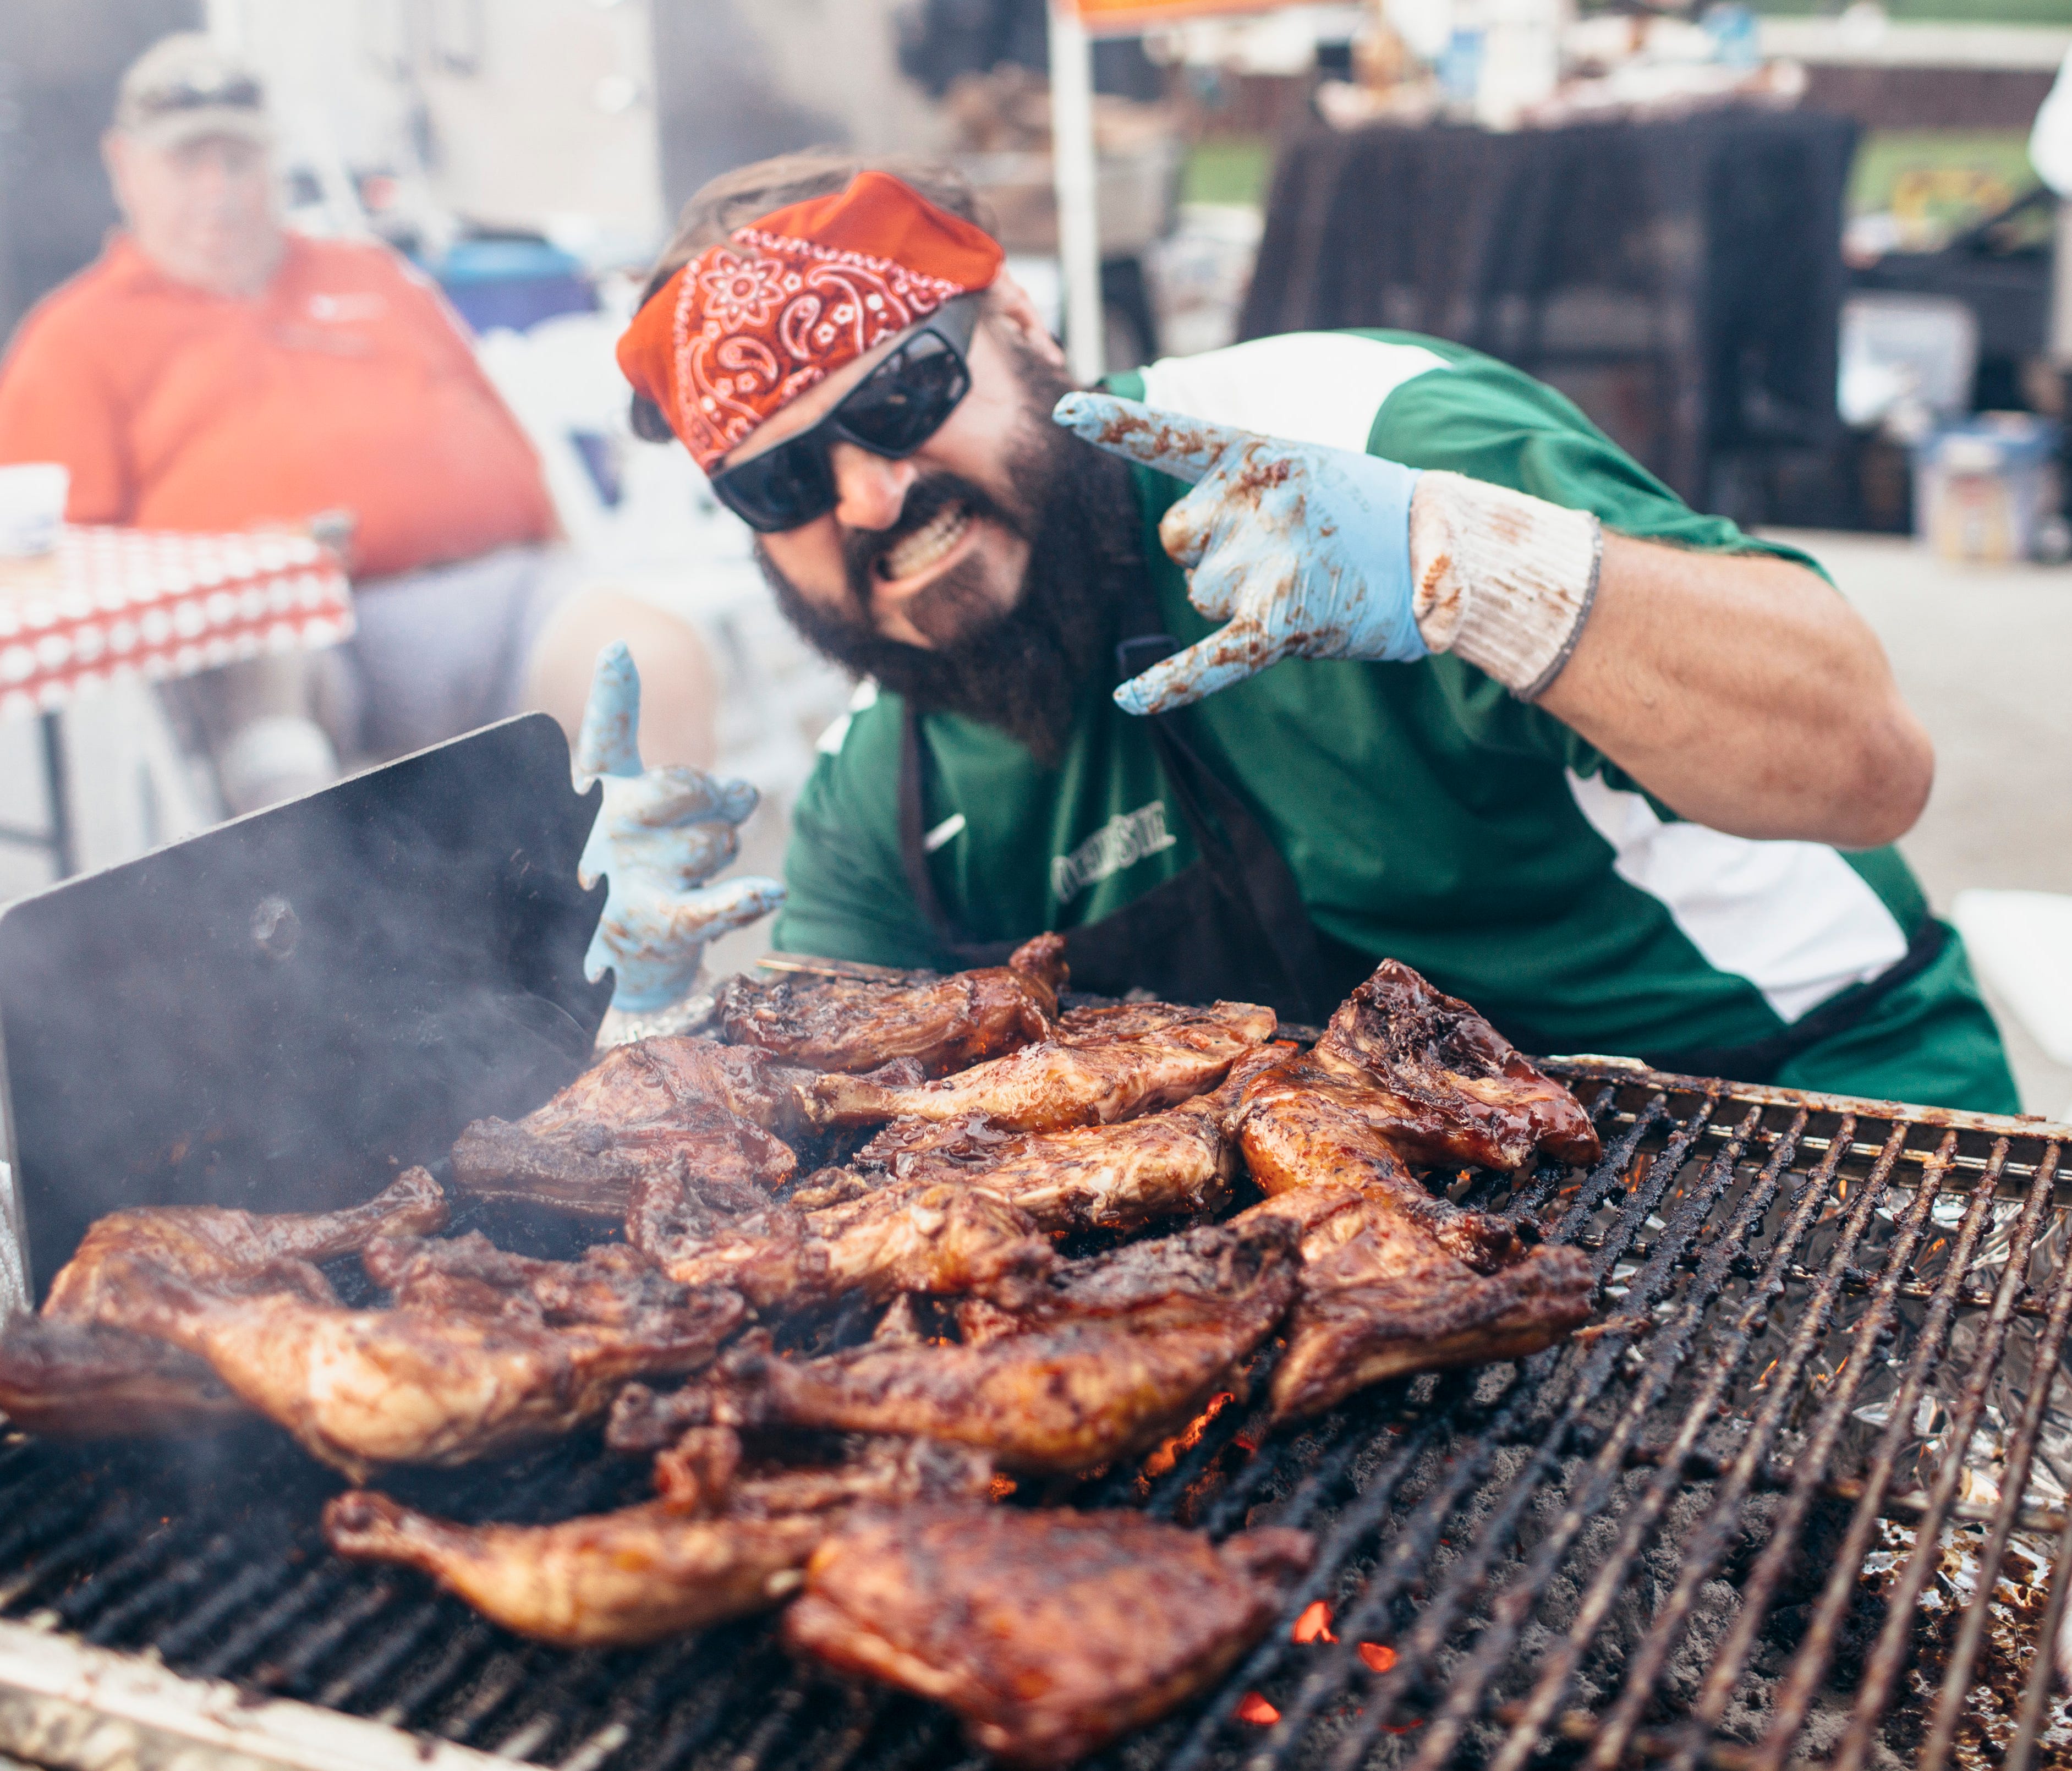 The Windy City Smokeout festival returns to Chicago, July 14-16 with more than 15 pitmasters and live music.